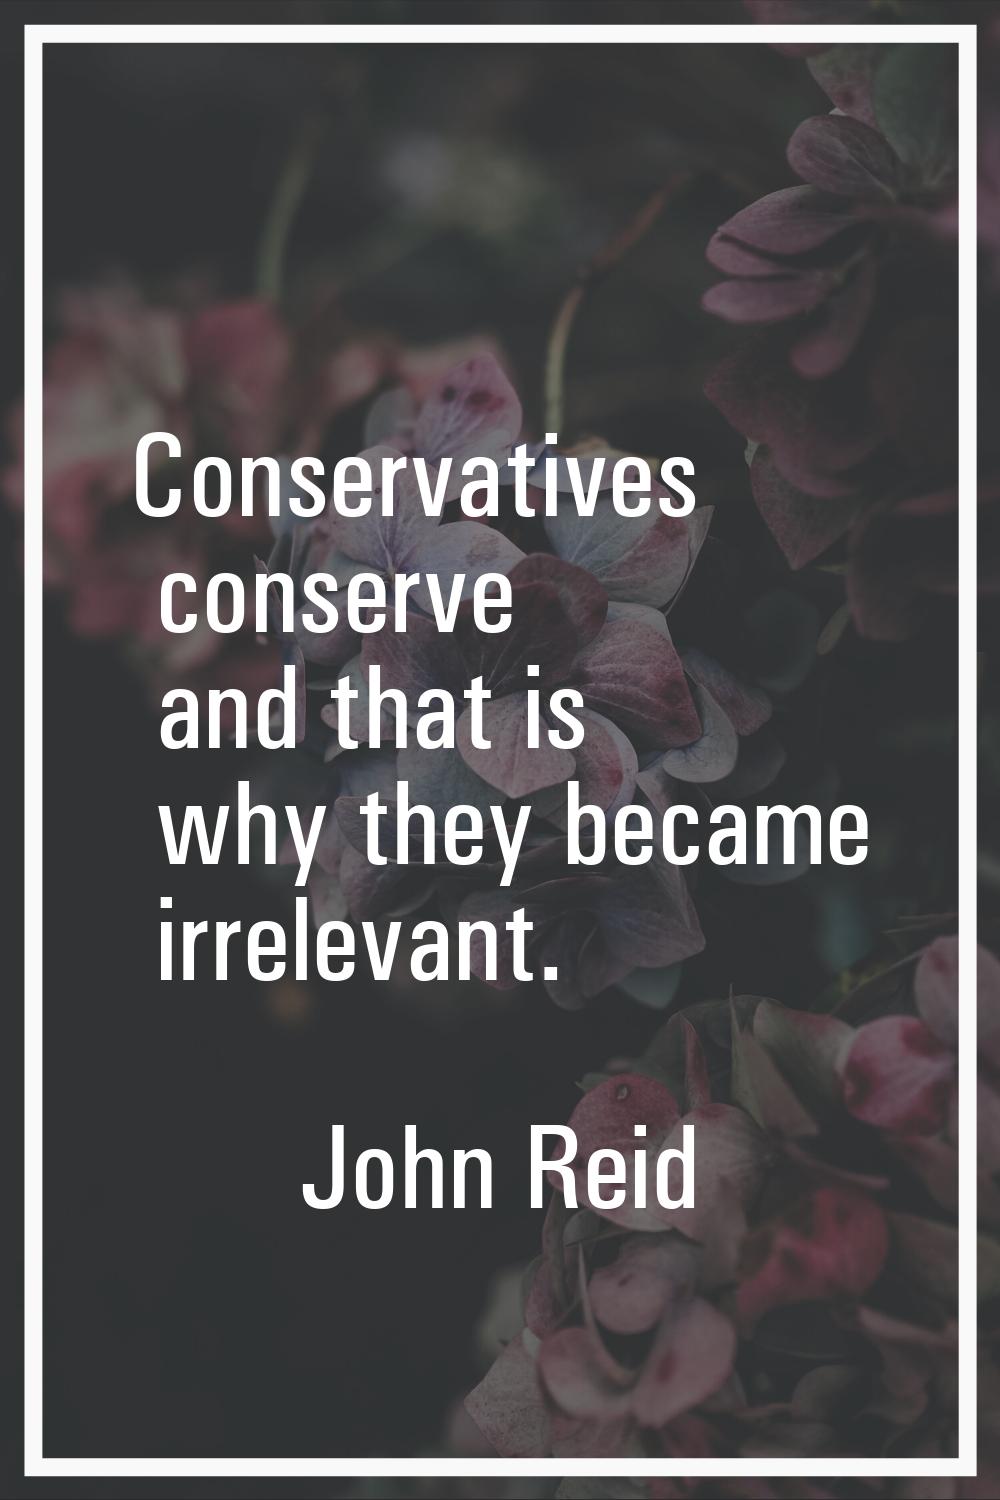 Conservatives conserve and that is why they became irrelevant.